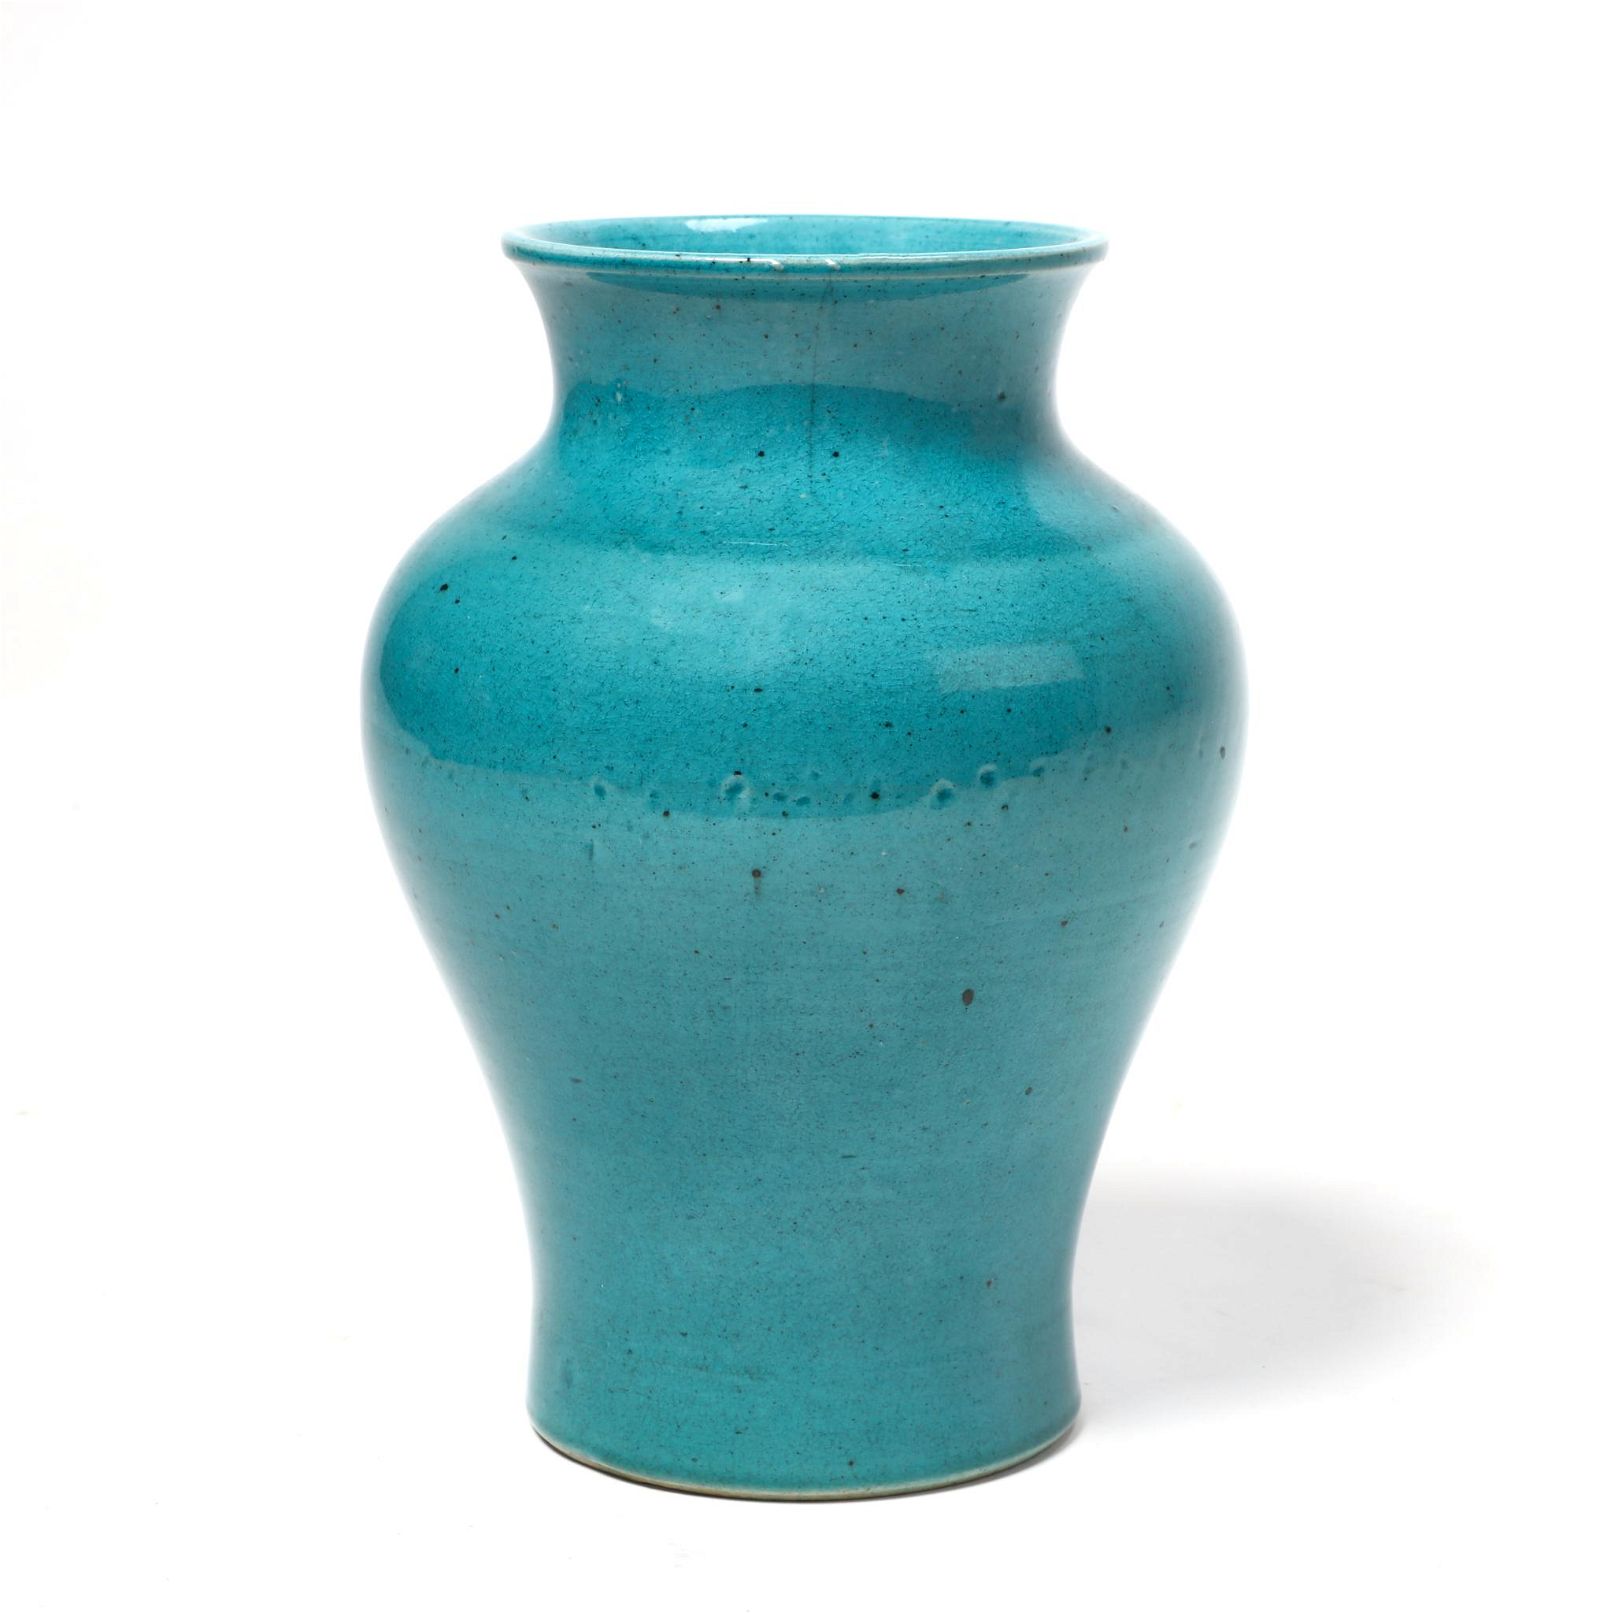 A CHINESE TURQUOISE GLAZED PORCELAIN 2fb298a